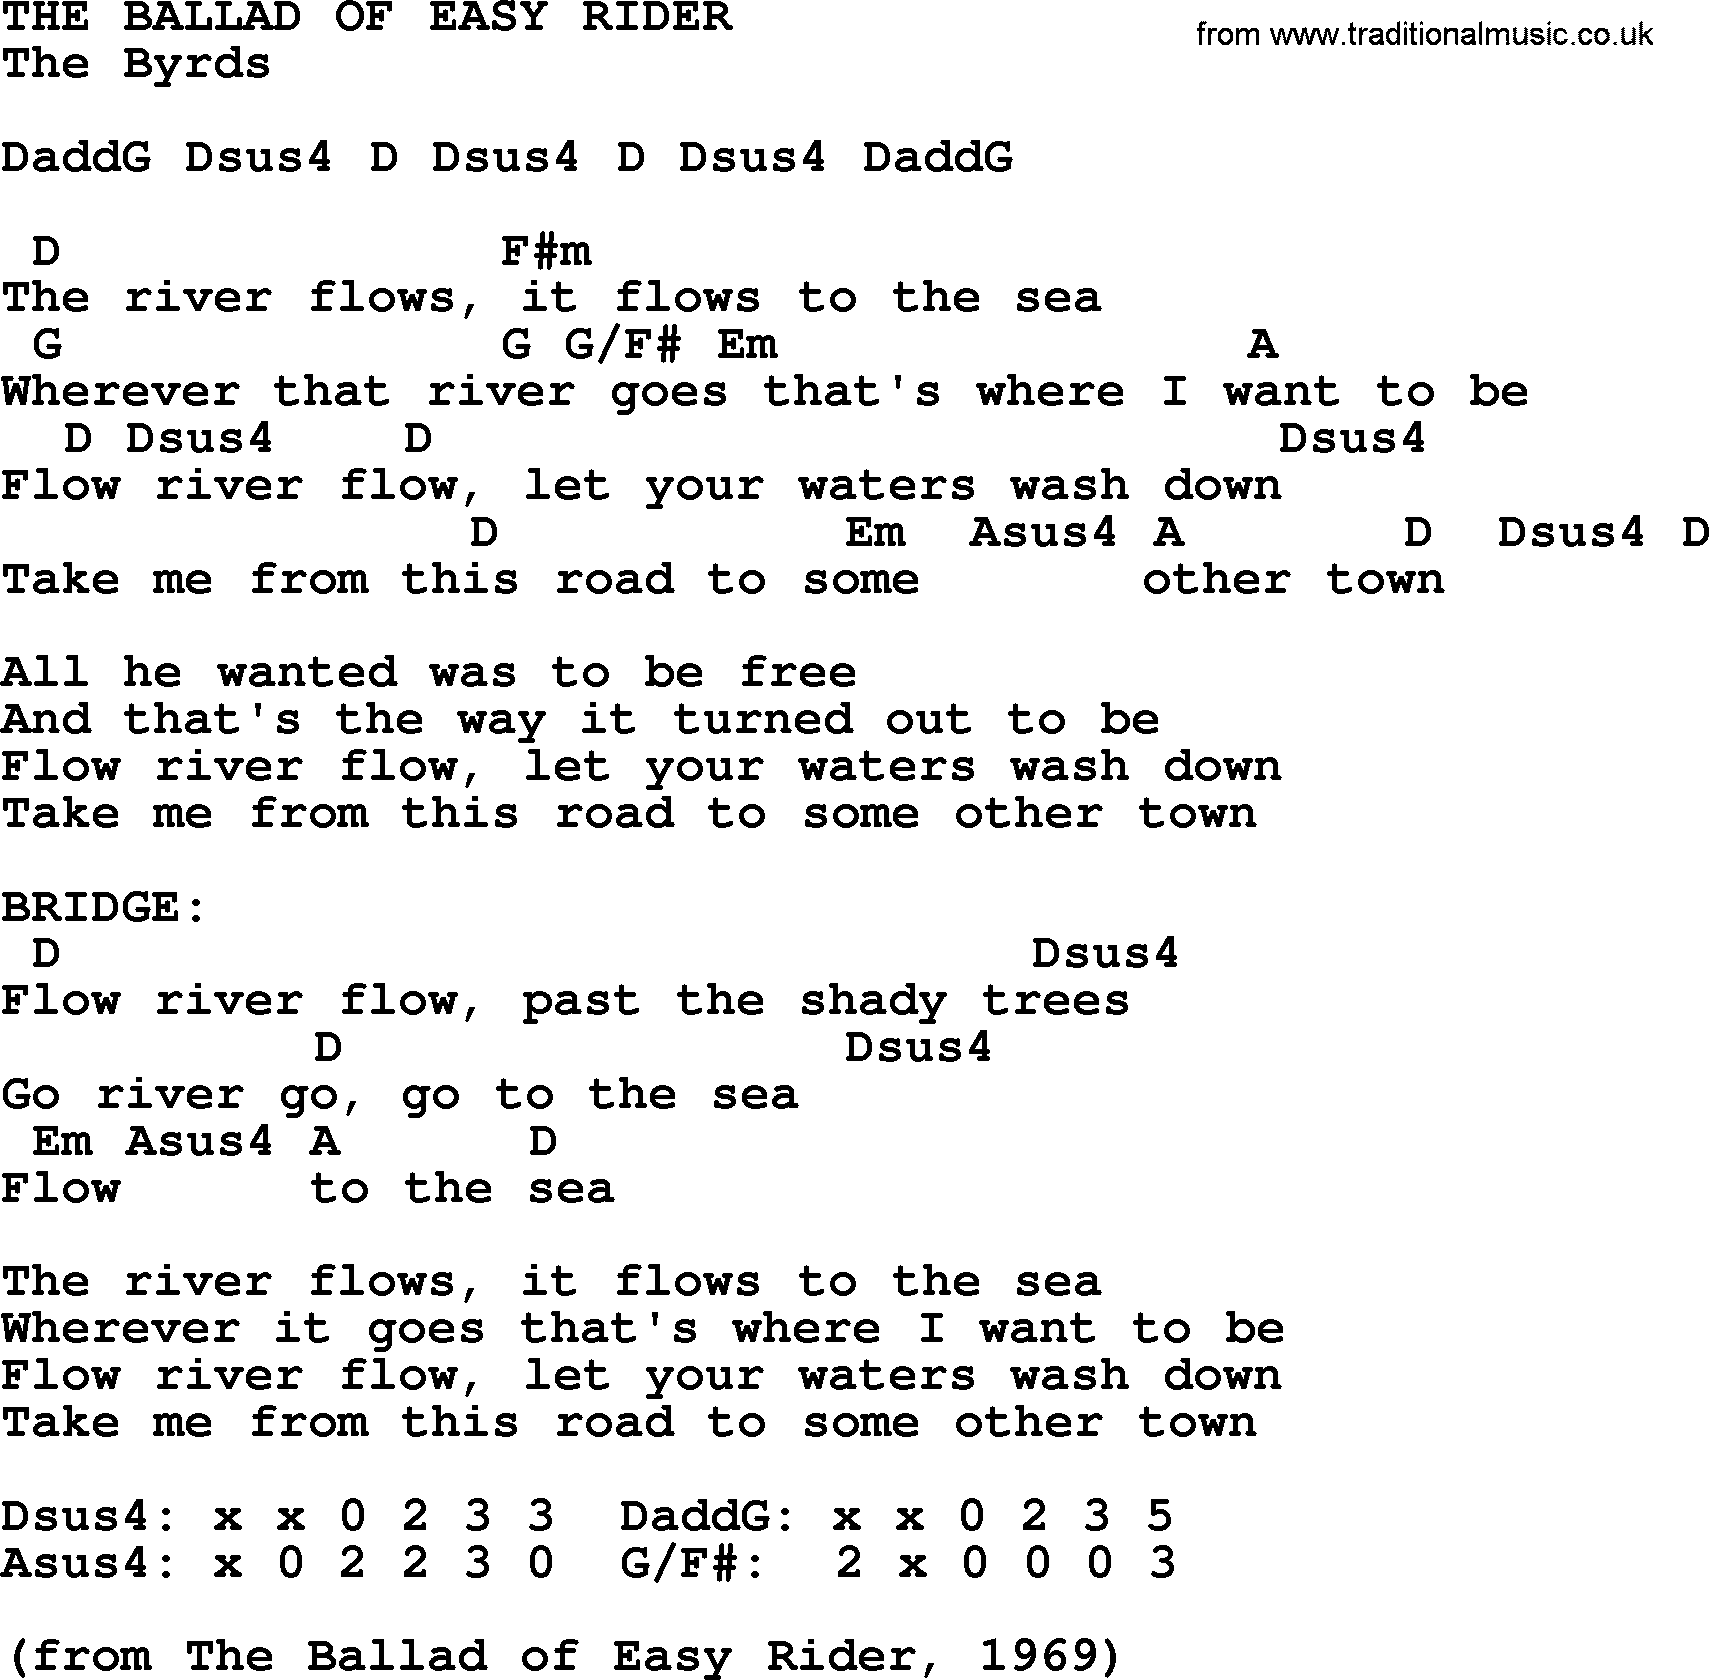 The Byrds song The Ballad Of Easy Rider, lyrics and chords